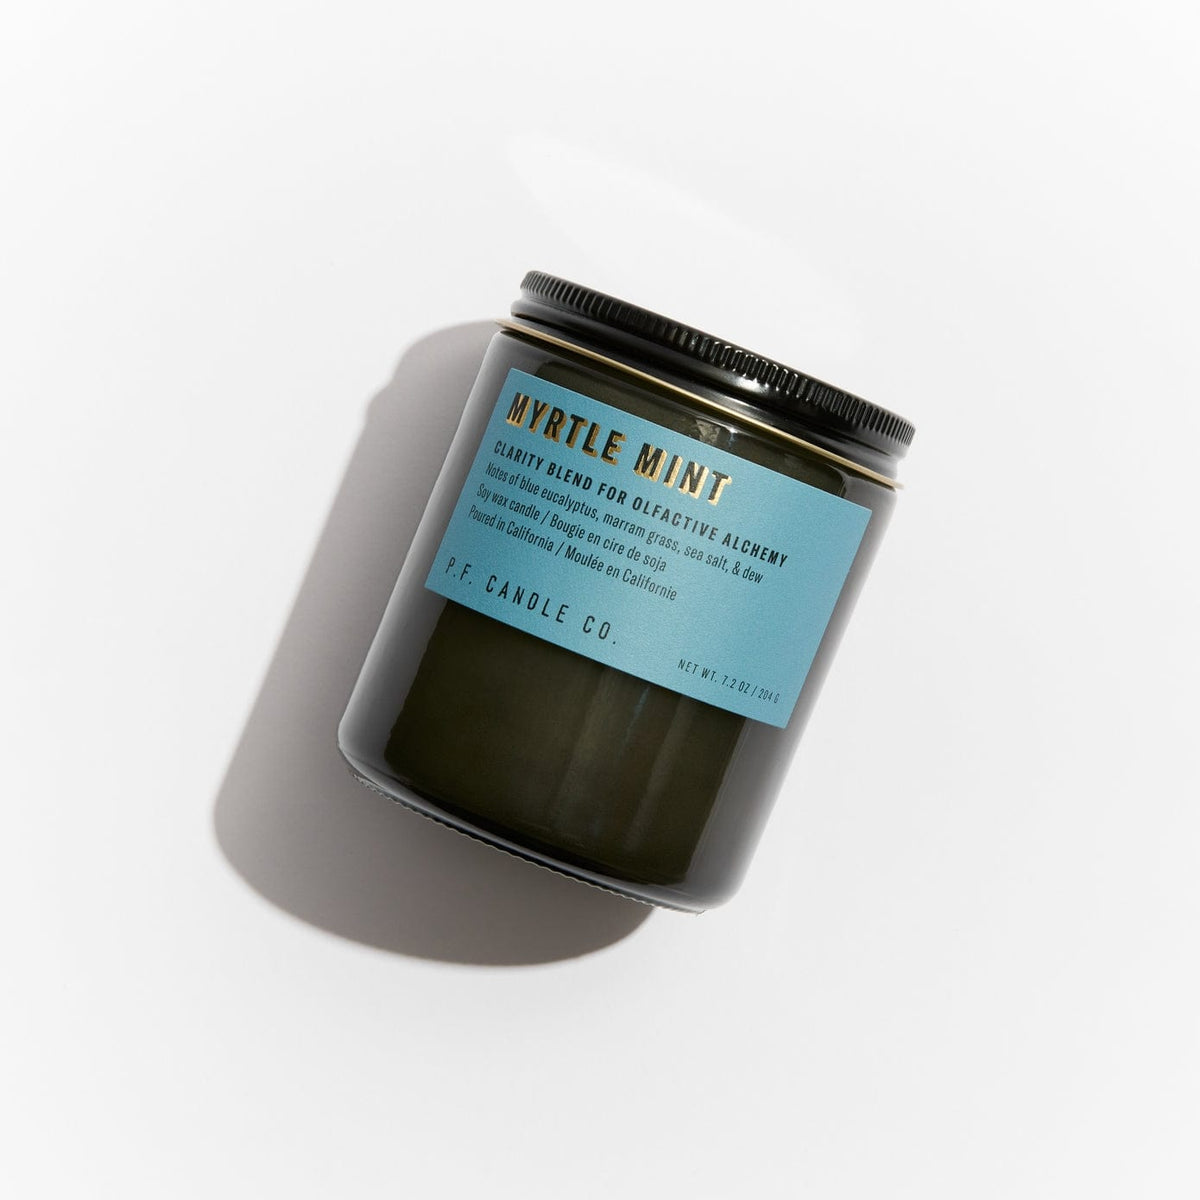 P.F. Candle Co Myrtle Mint Alchemy Soy Candle